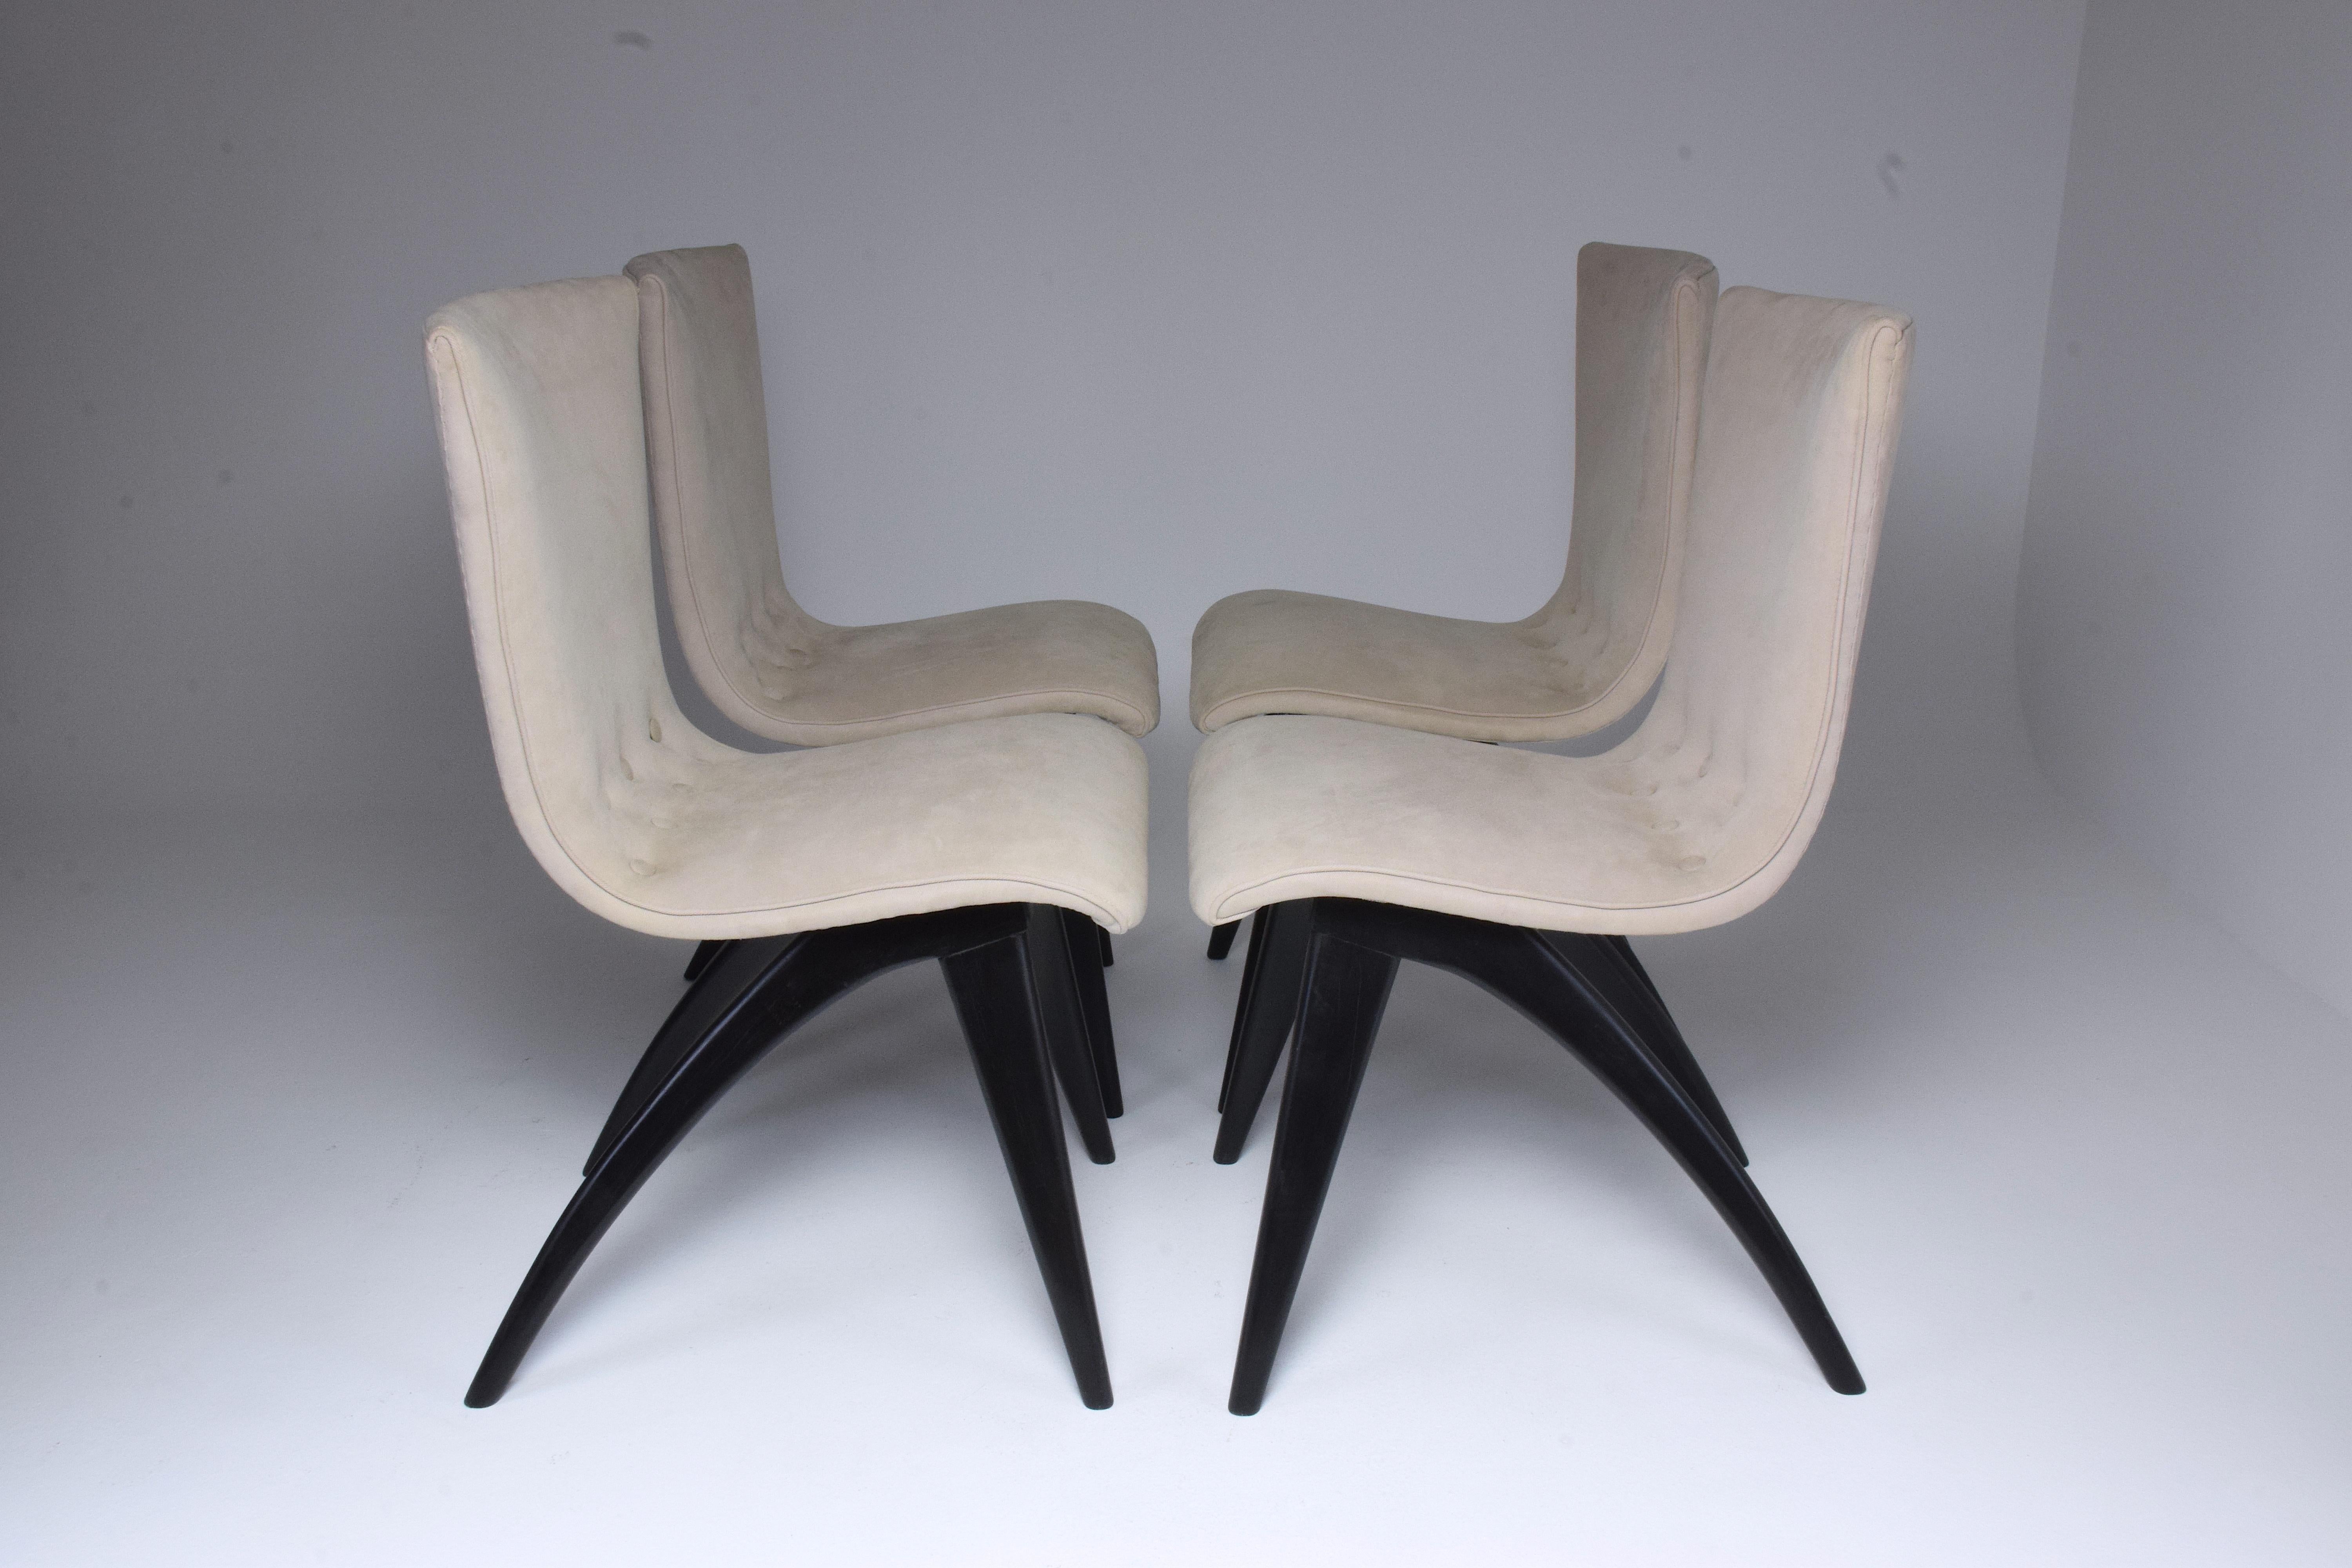 Lacquered Midcentury Scandinavian Dining Chairs by CJ Van Os Culemborg, Set of Four, 1950s